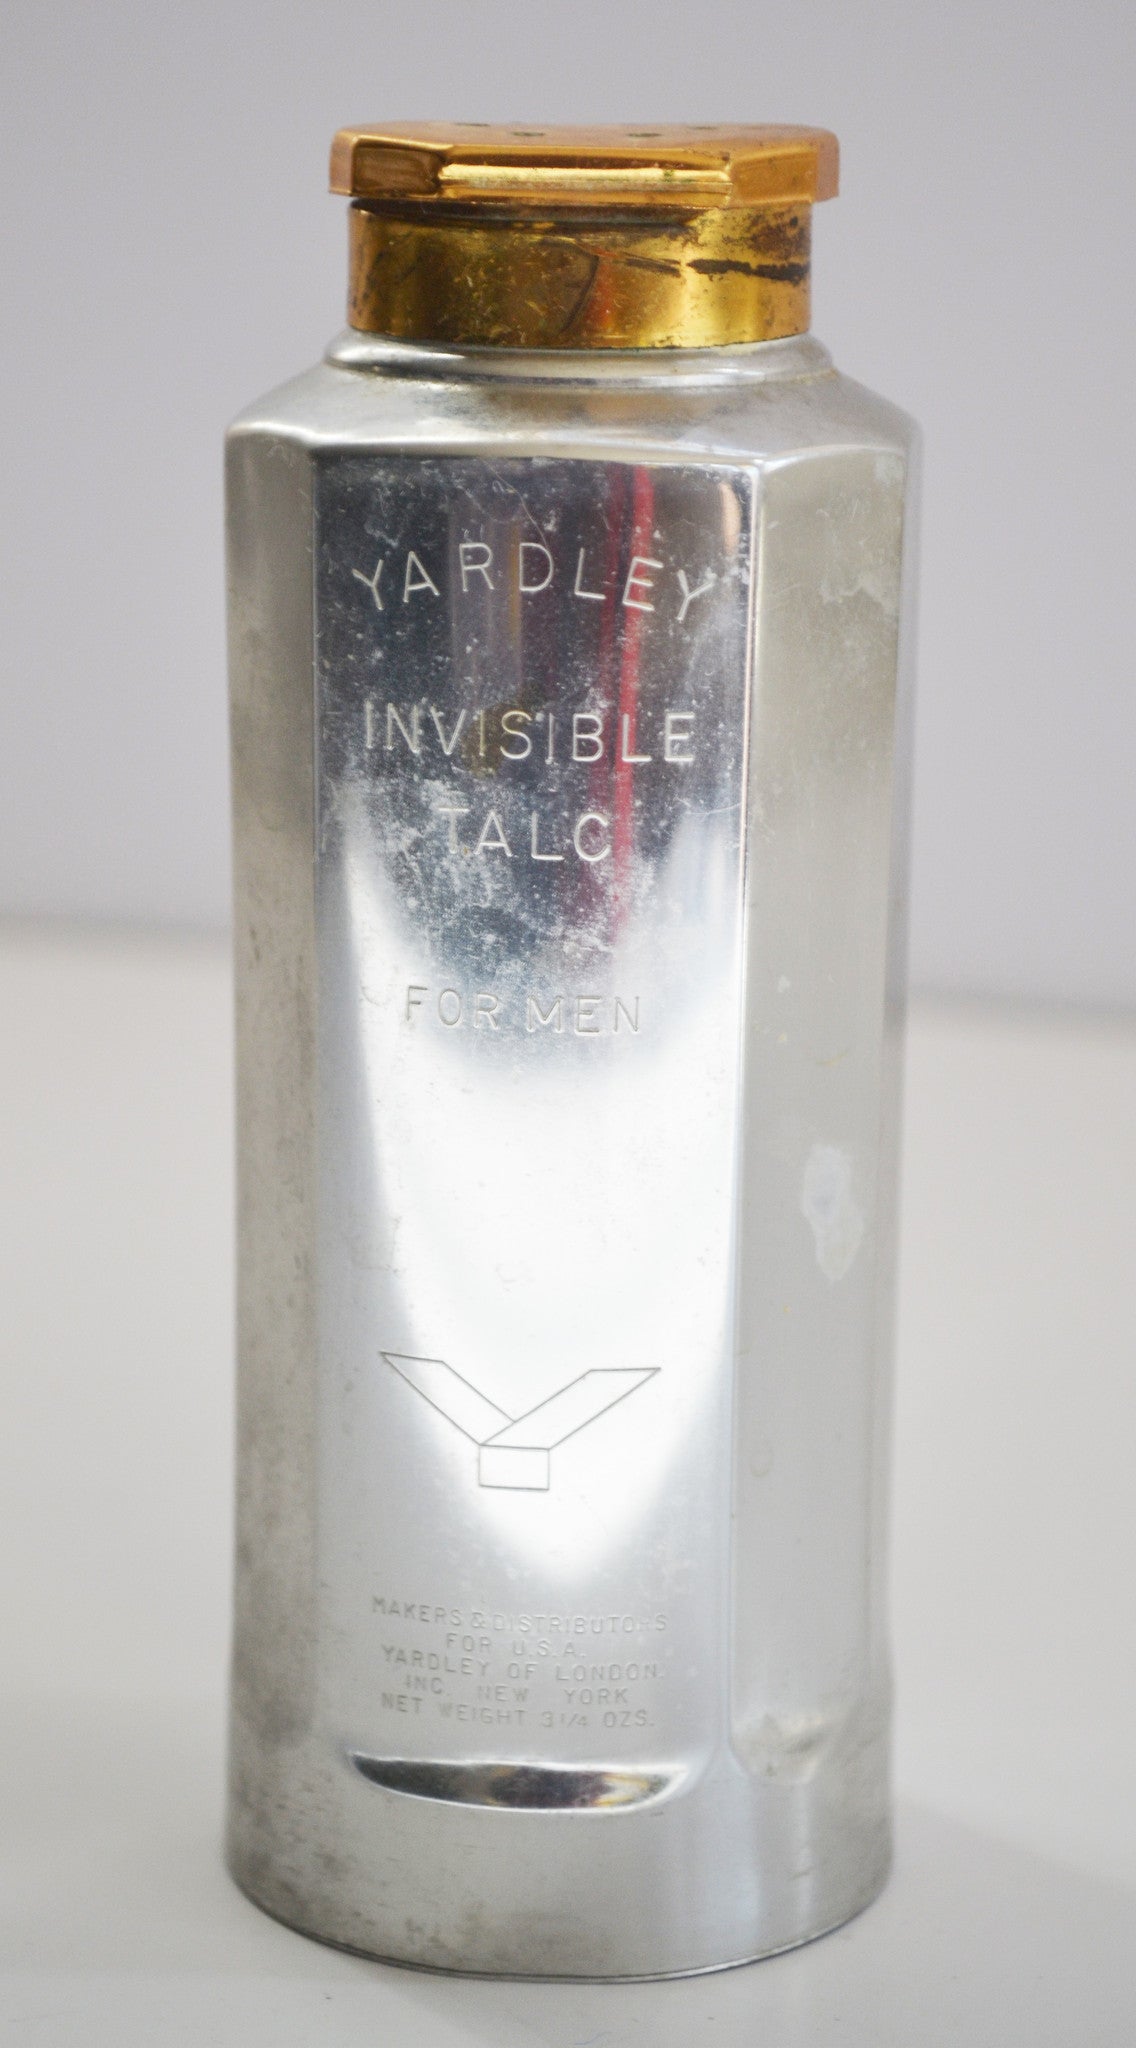 Yardley "Invisible Talc" For Men